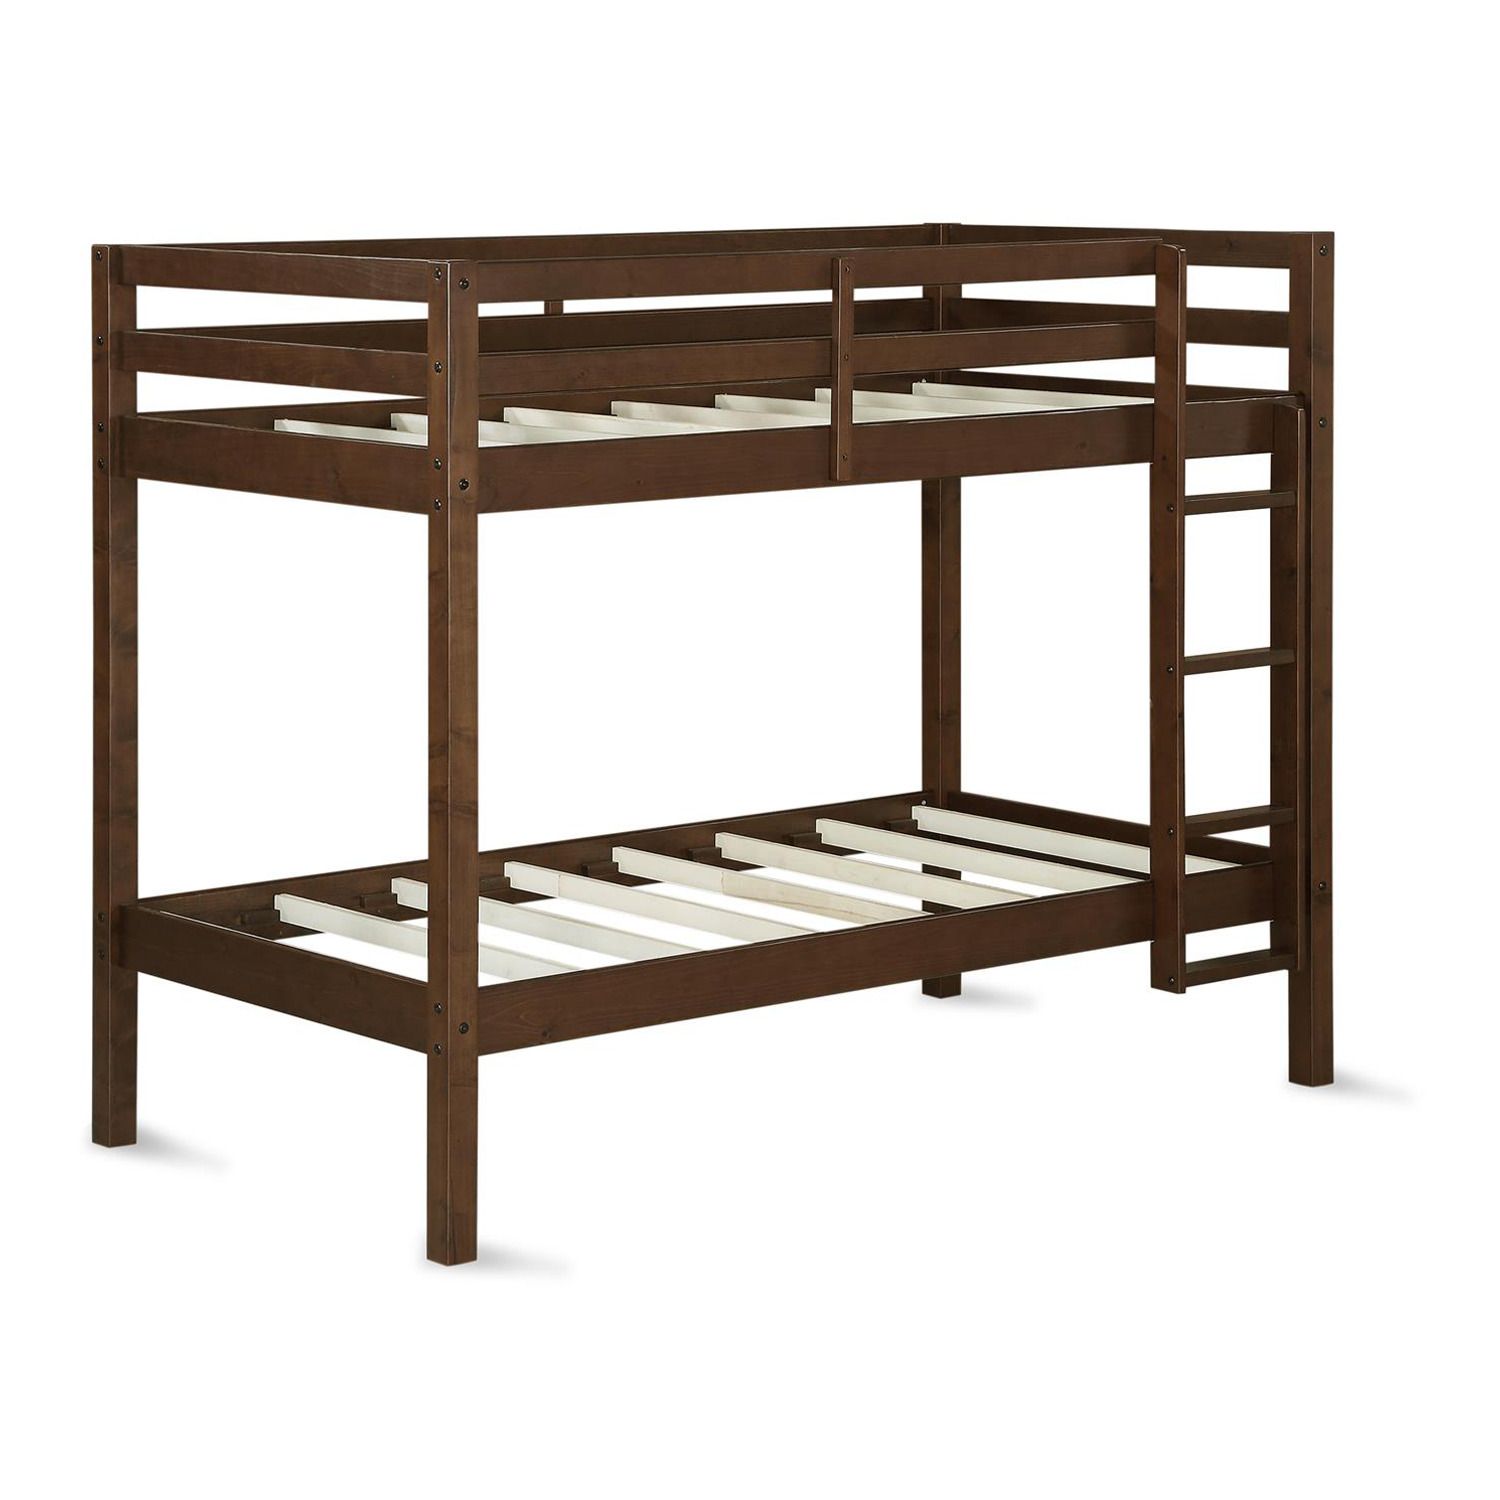 Image for Dorel Living Indiana Twin Bunk Bed at Kohl's.